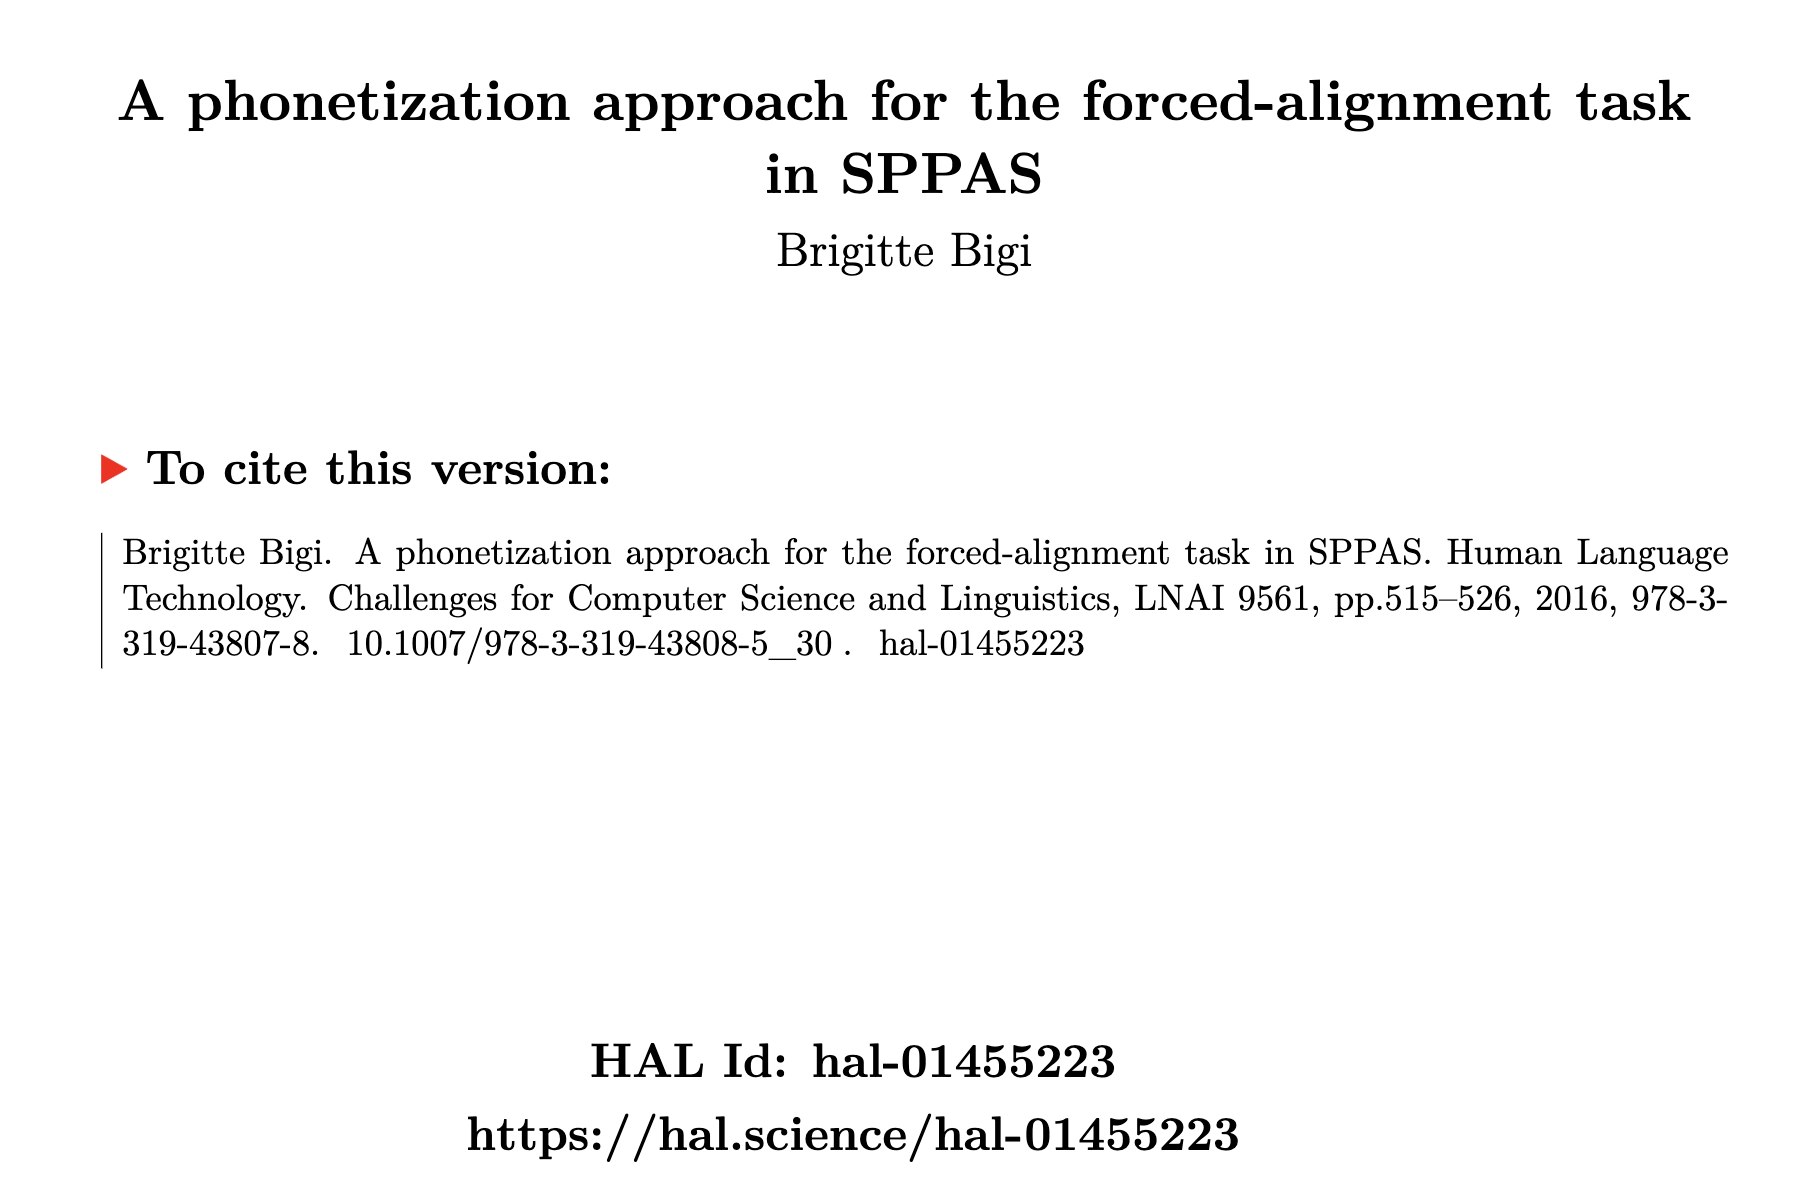 A phonetization approach for the forced-alignment task in SPPAS